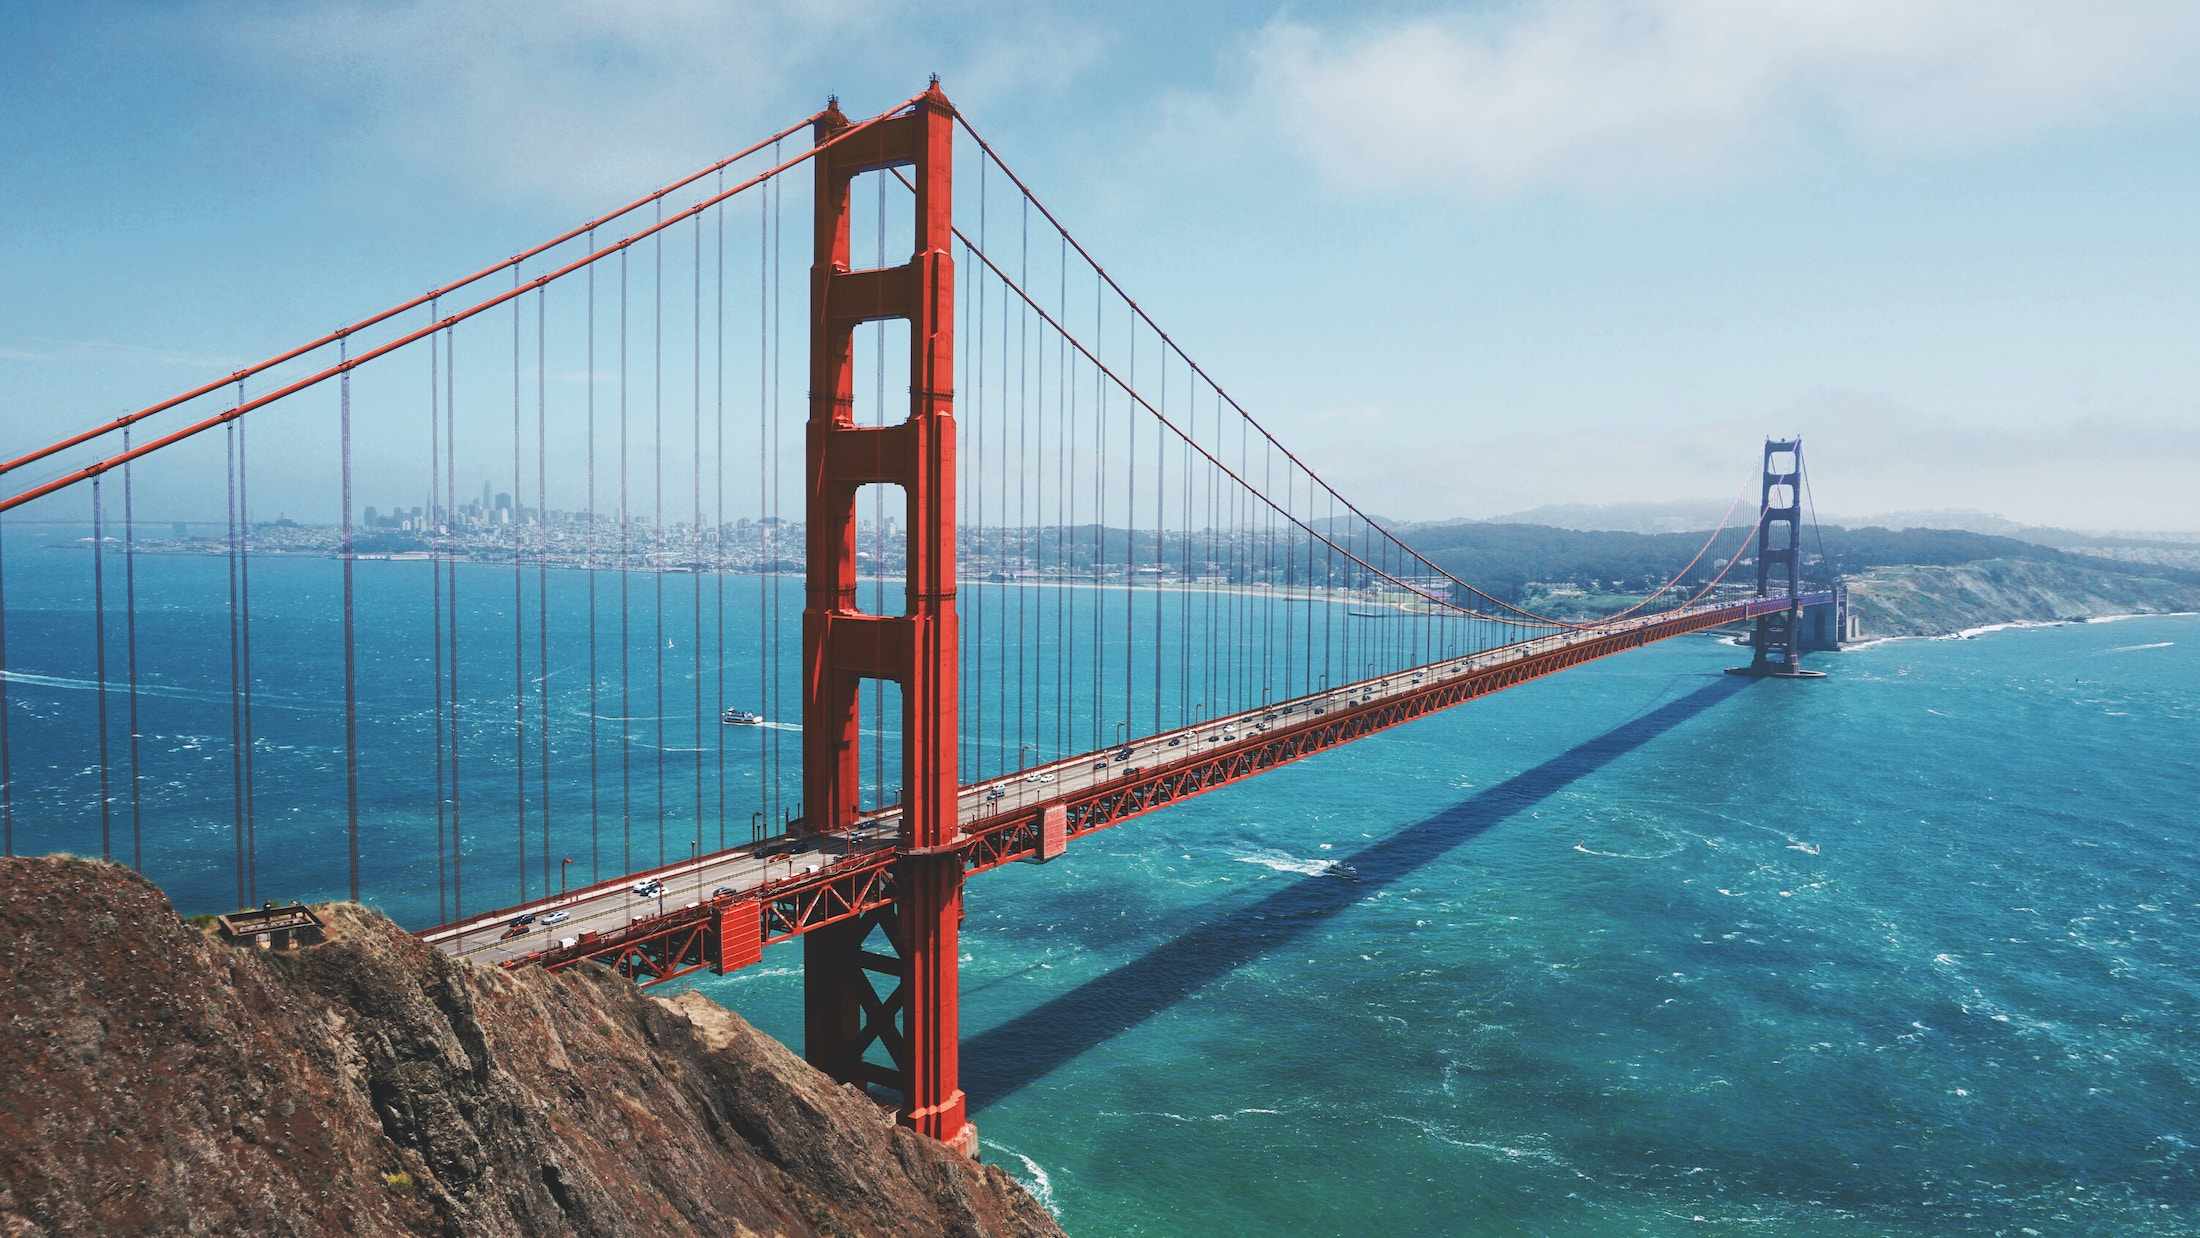 The Best Road Trips From San Francisco: Four Day Road Trip Itinerary